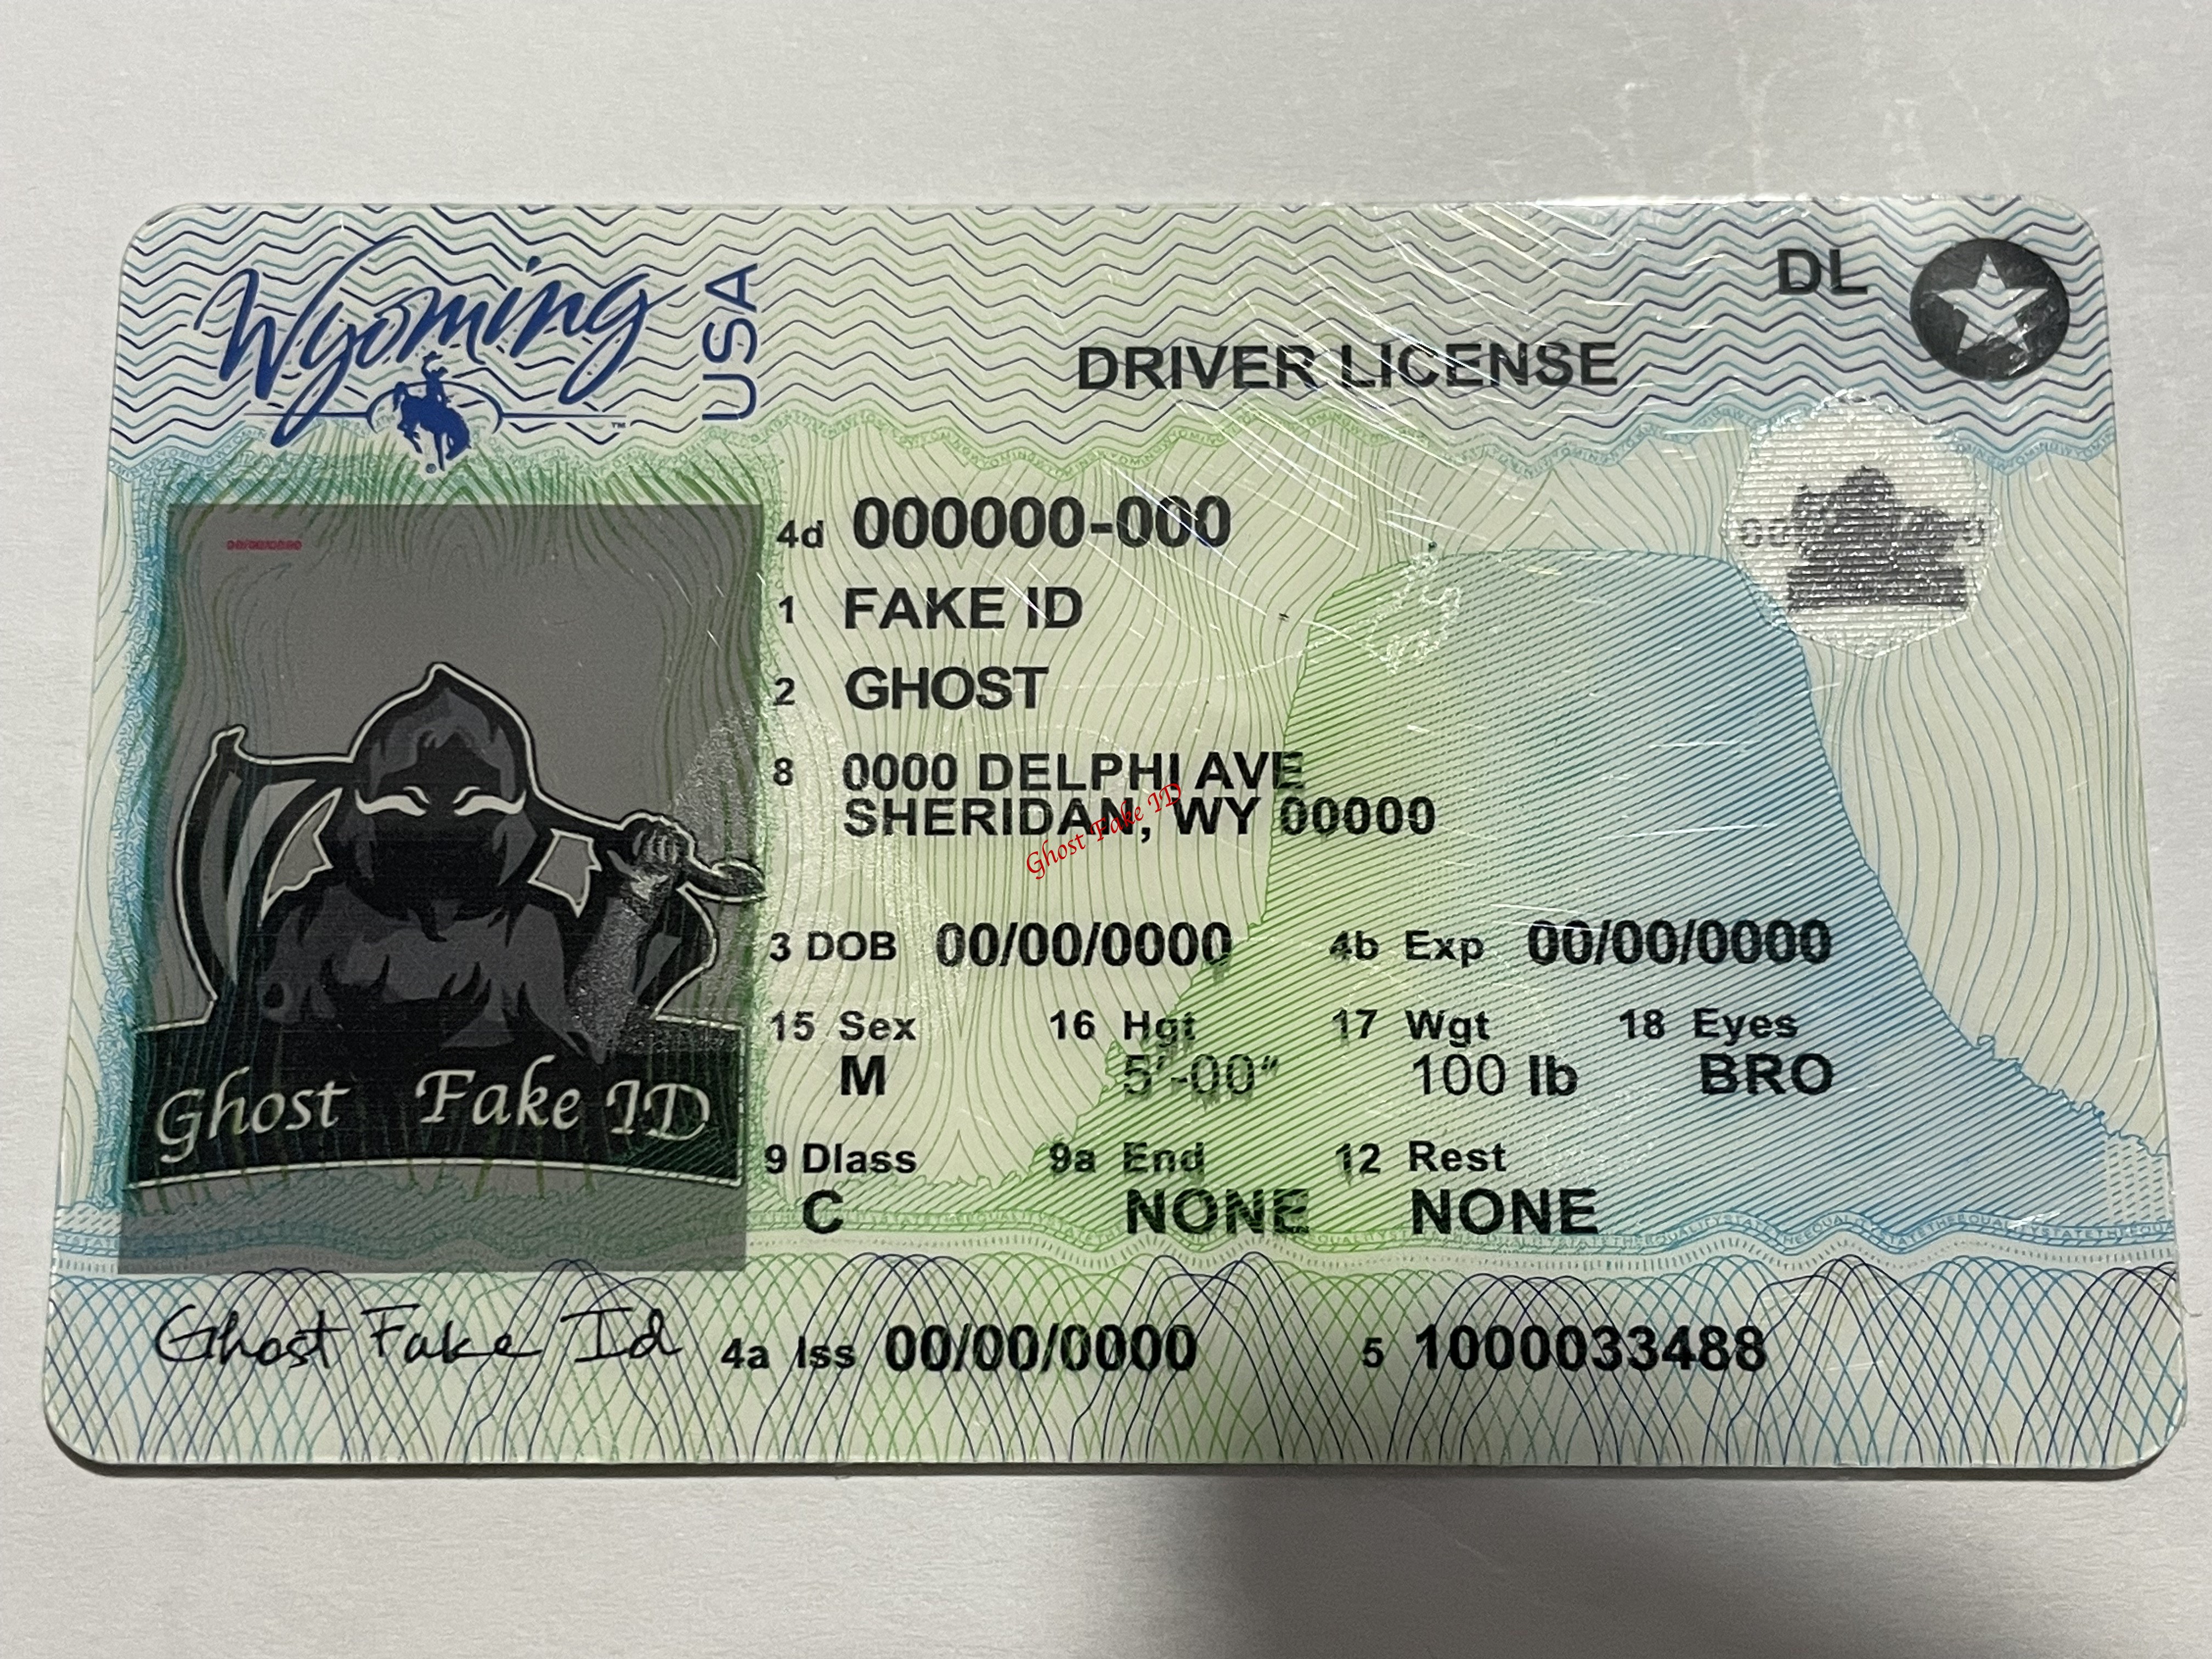 Wyoming - Scanable fake id